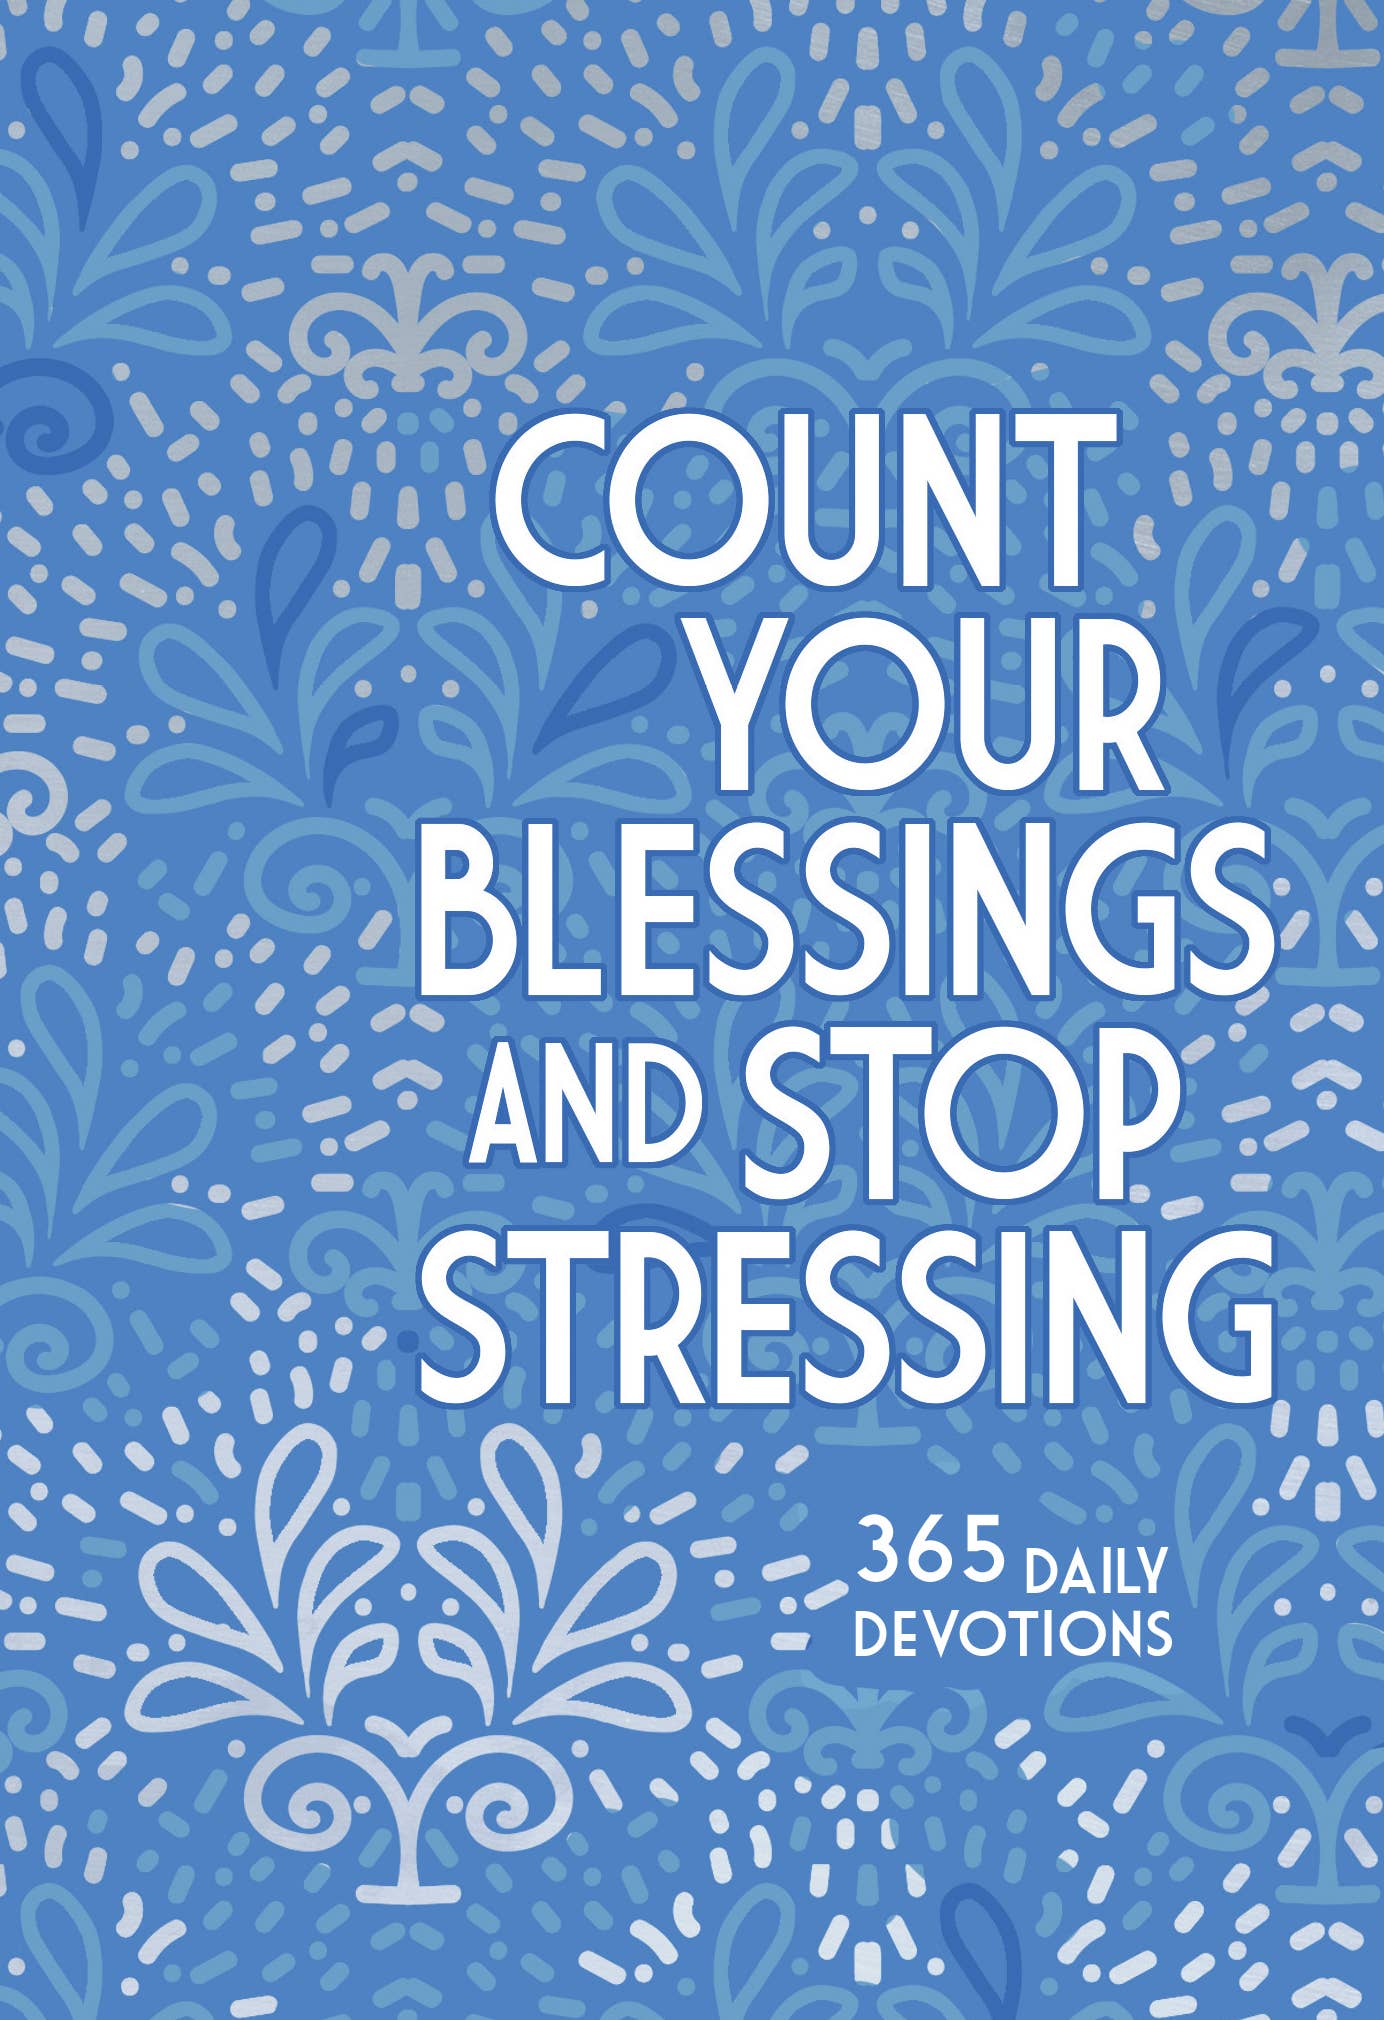 Count Your Blessings and Stop Stressing